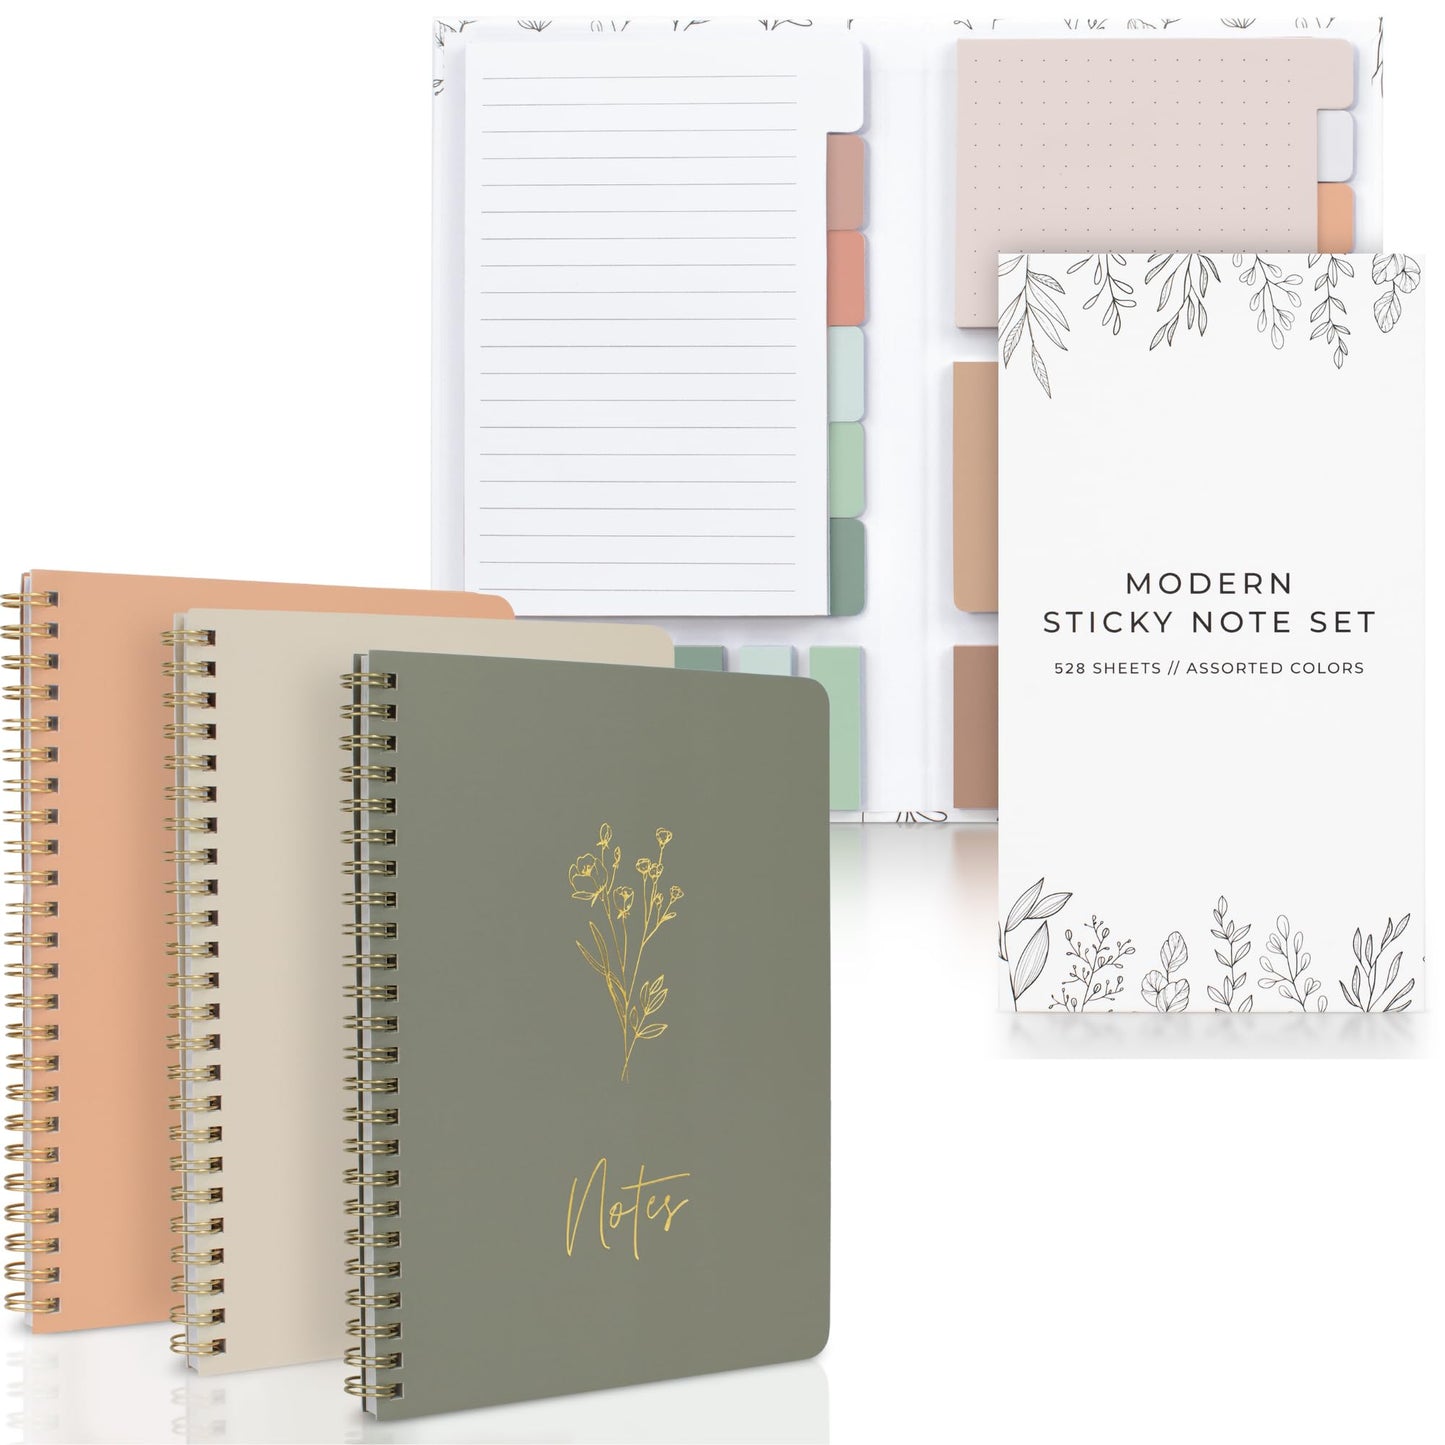 Aesthetic Spiral Notebook Set and Pastel Sticky Notes Bundle - Perfect Office Desk Supplies to Say Organized at Work or School